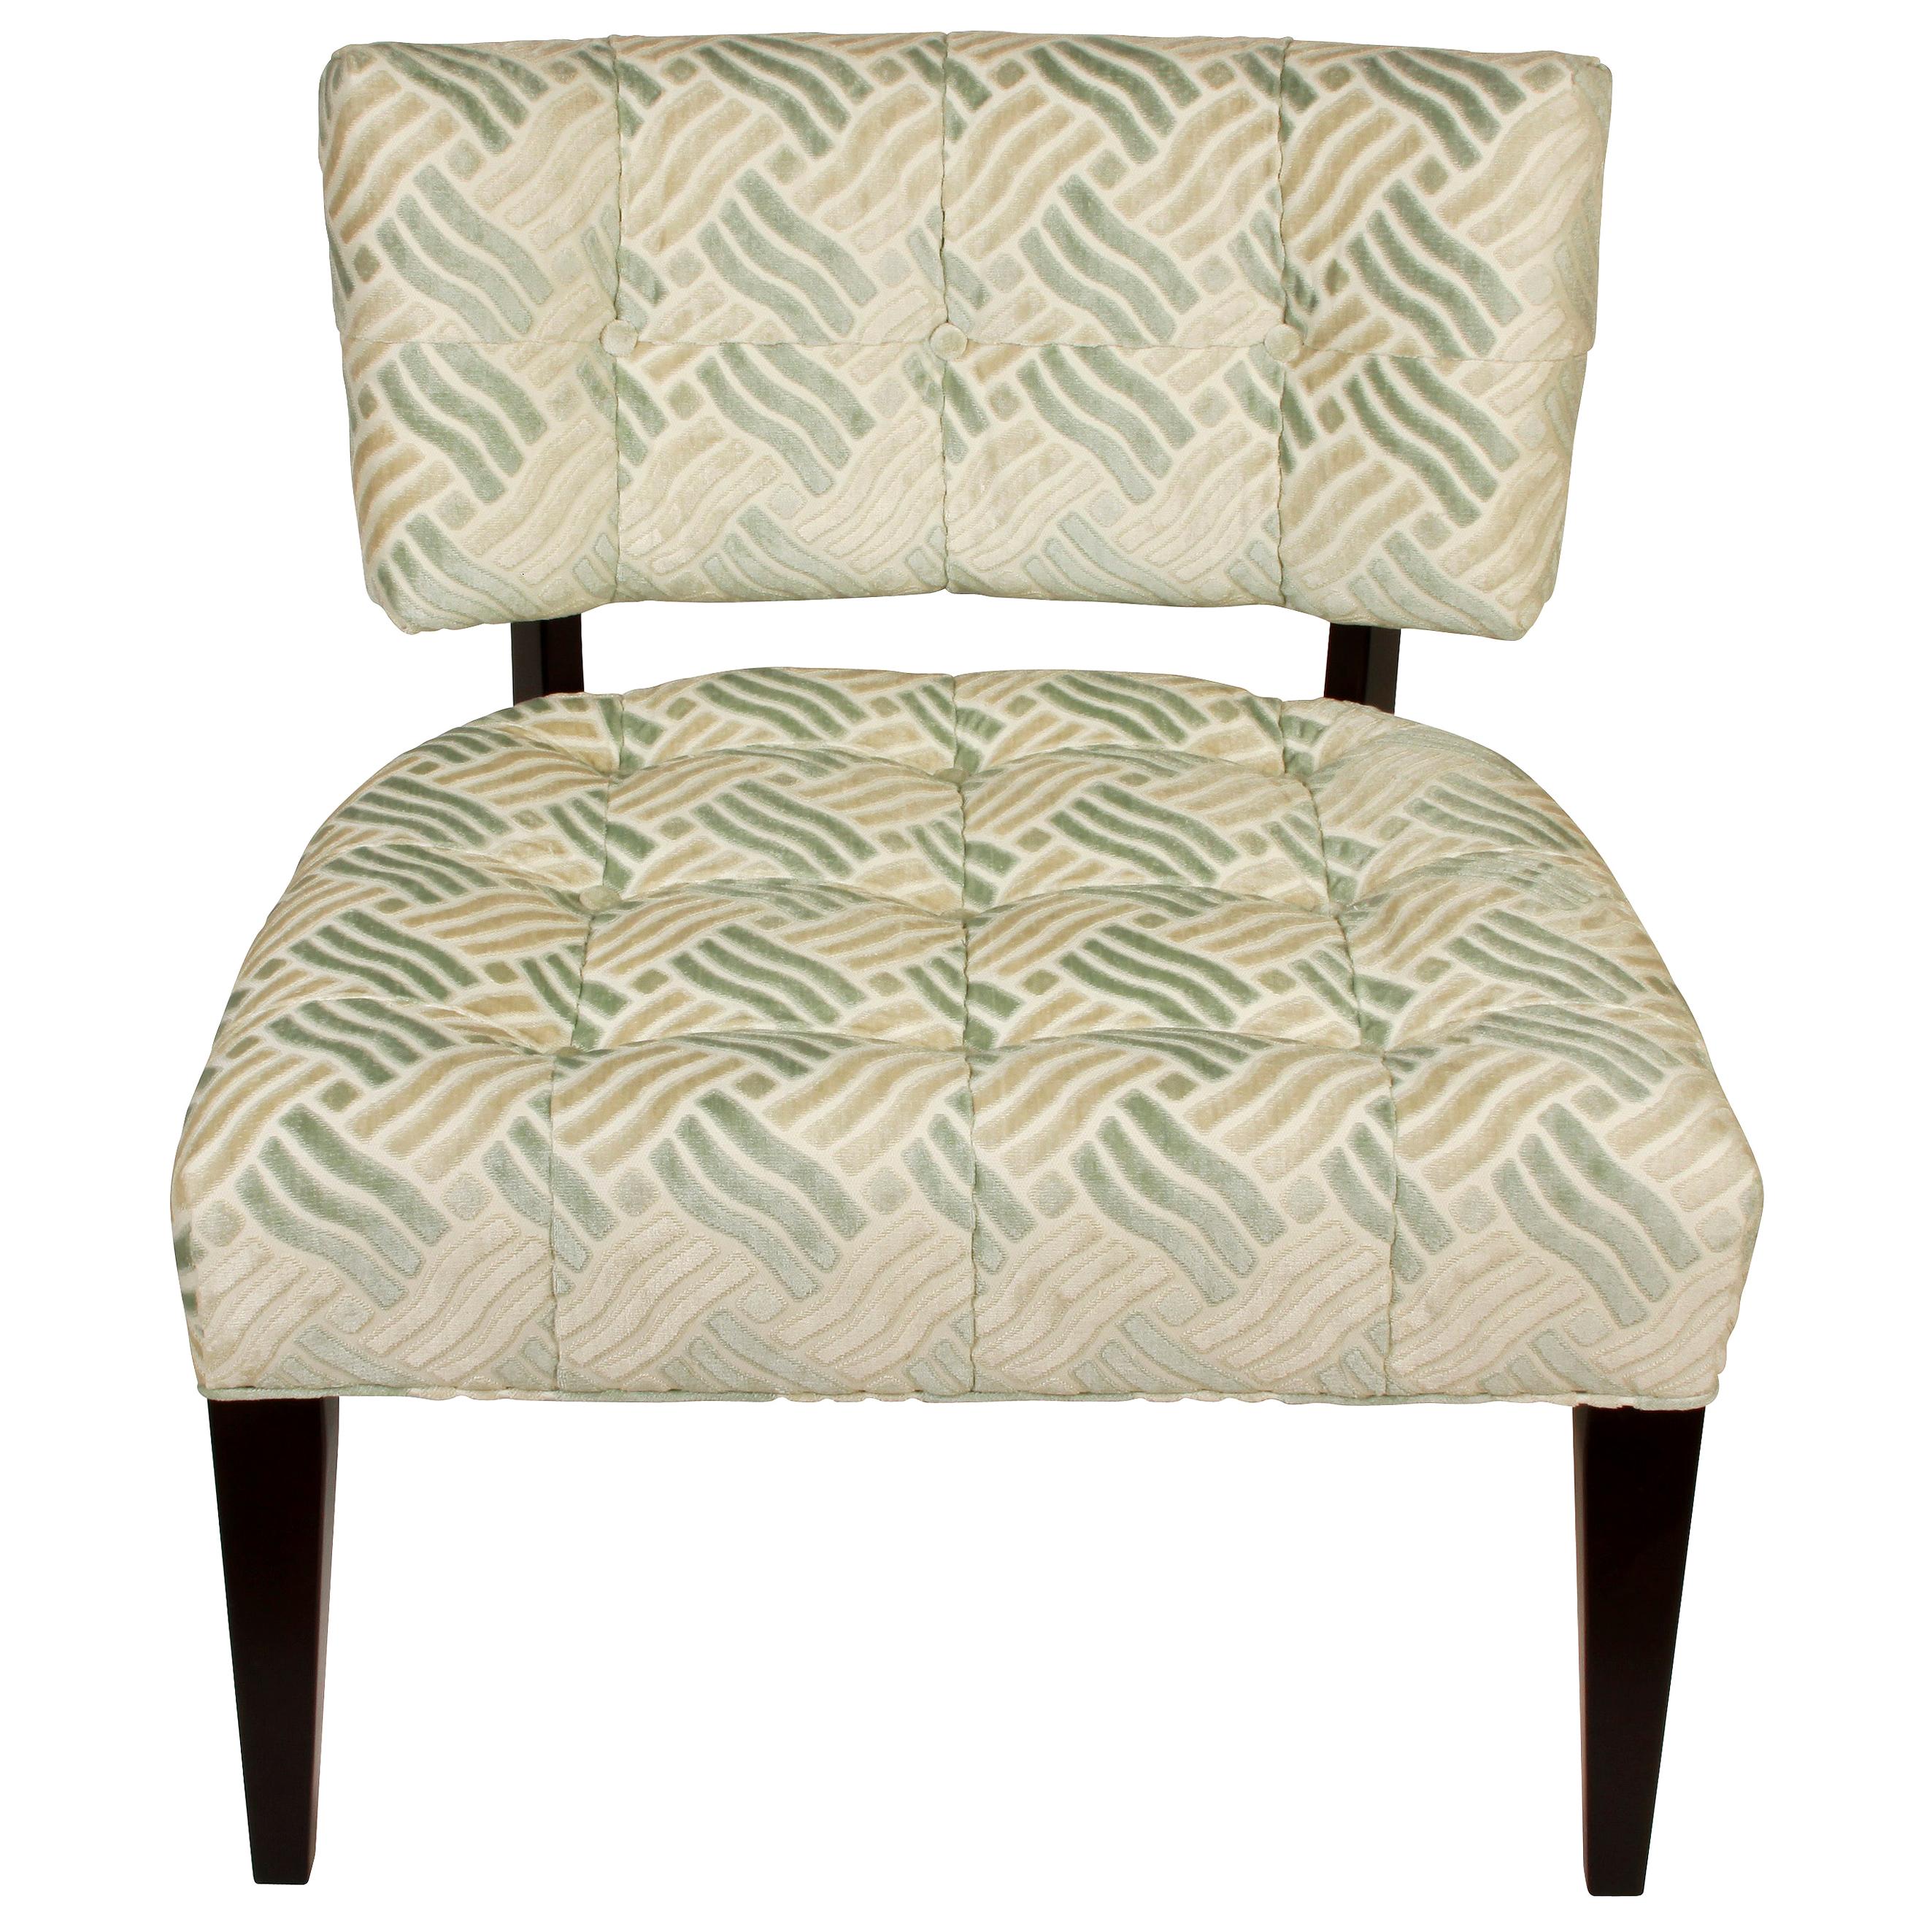 Pair of Low Mid-Century Modern Chairs in Fret Velvet Fabric